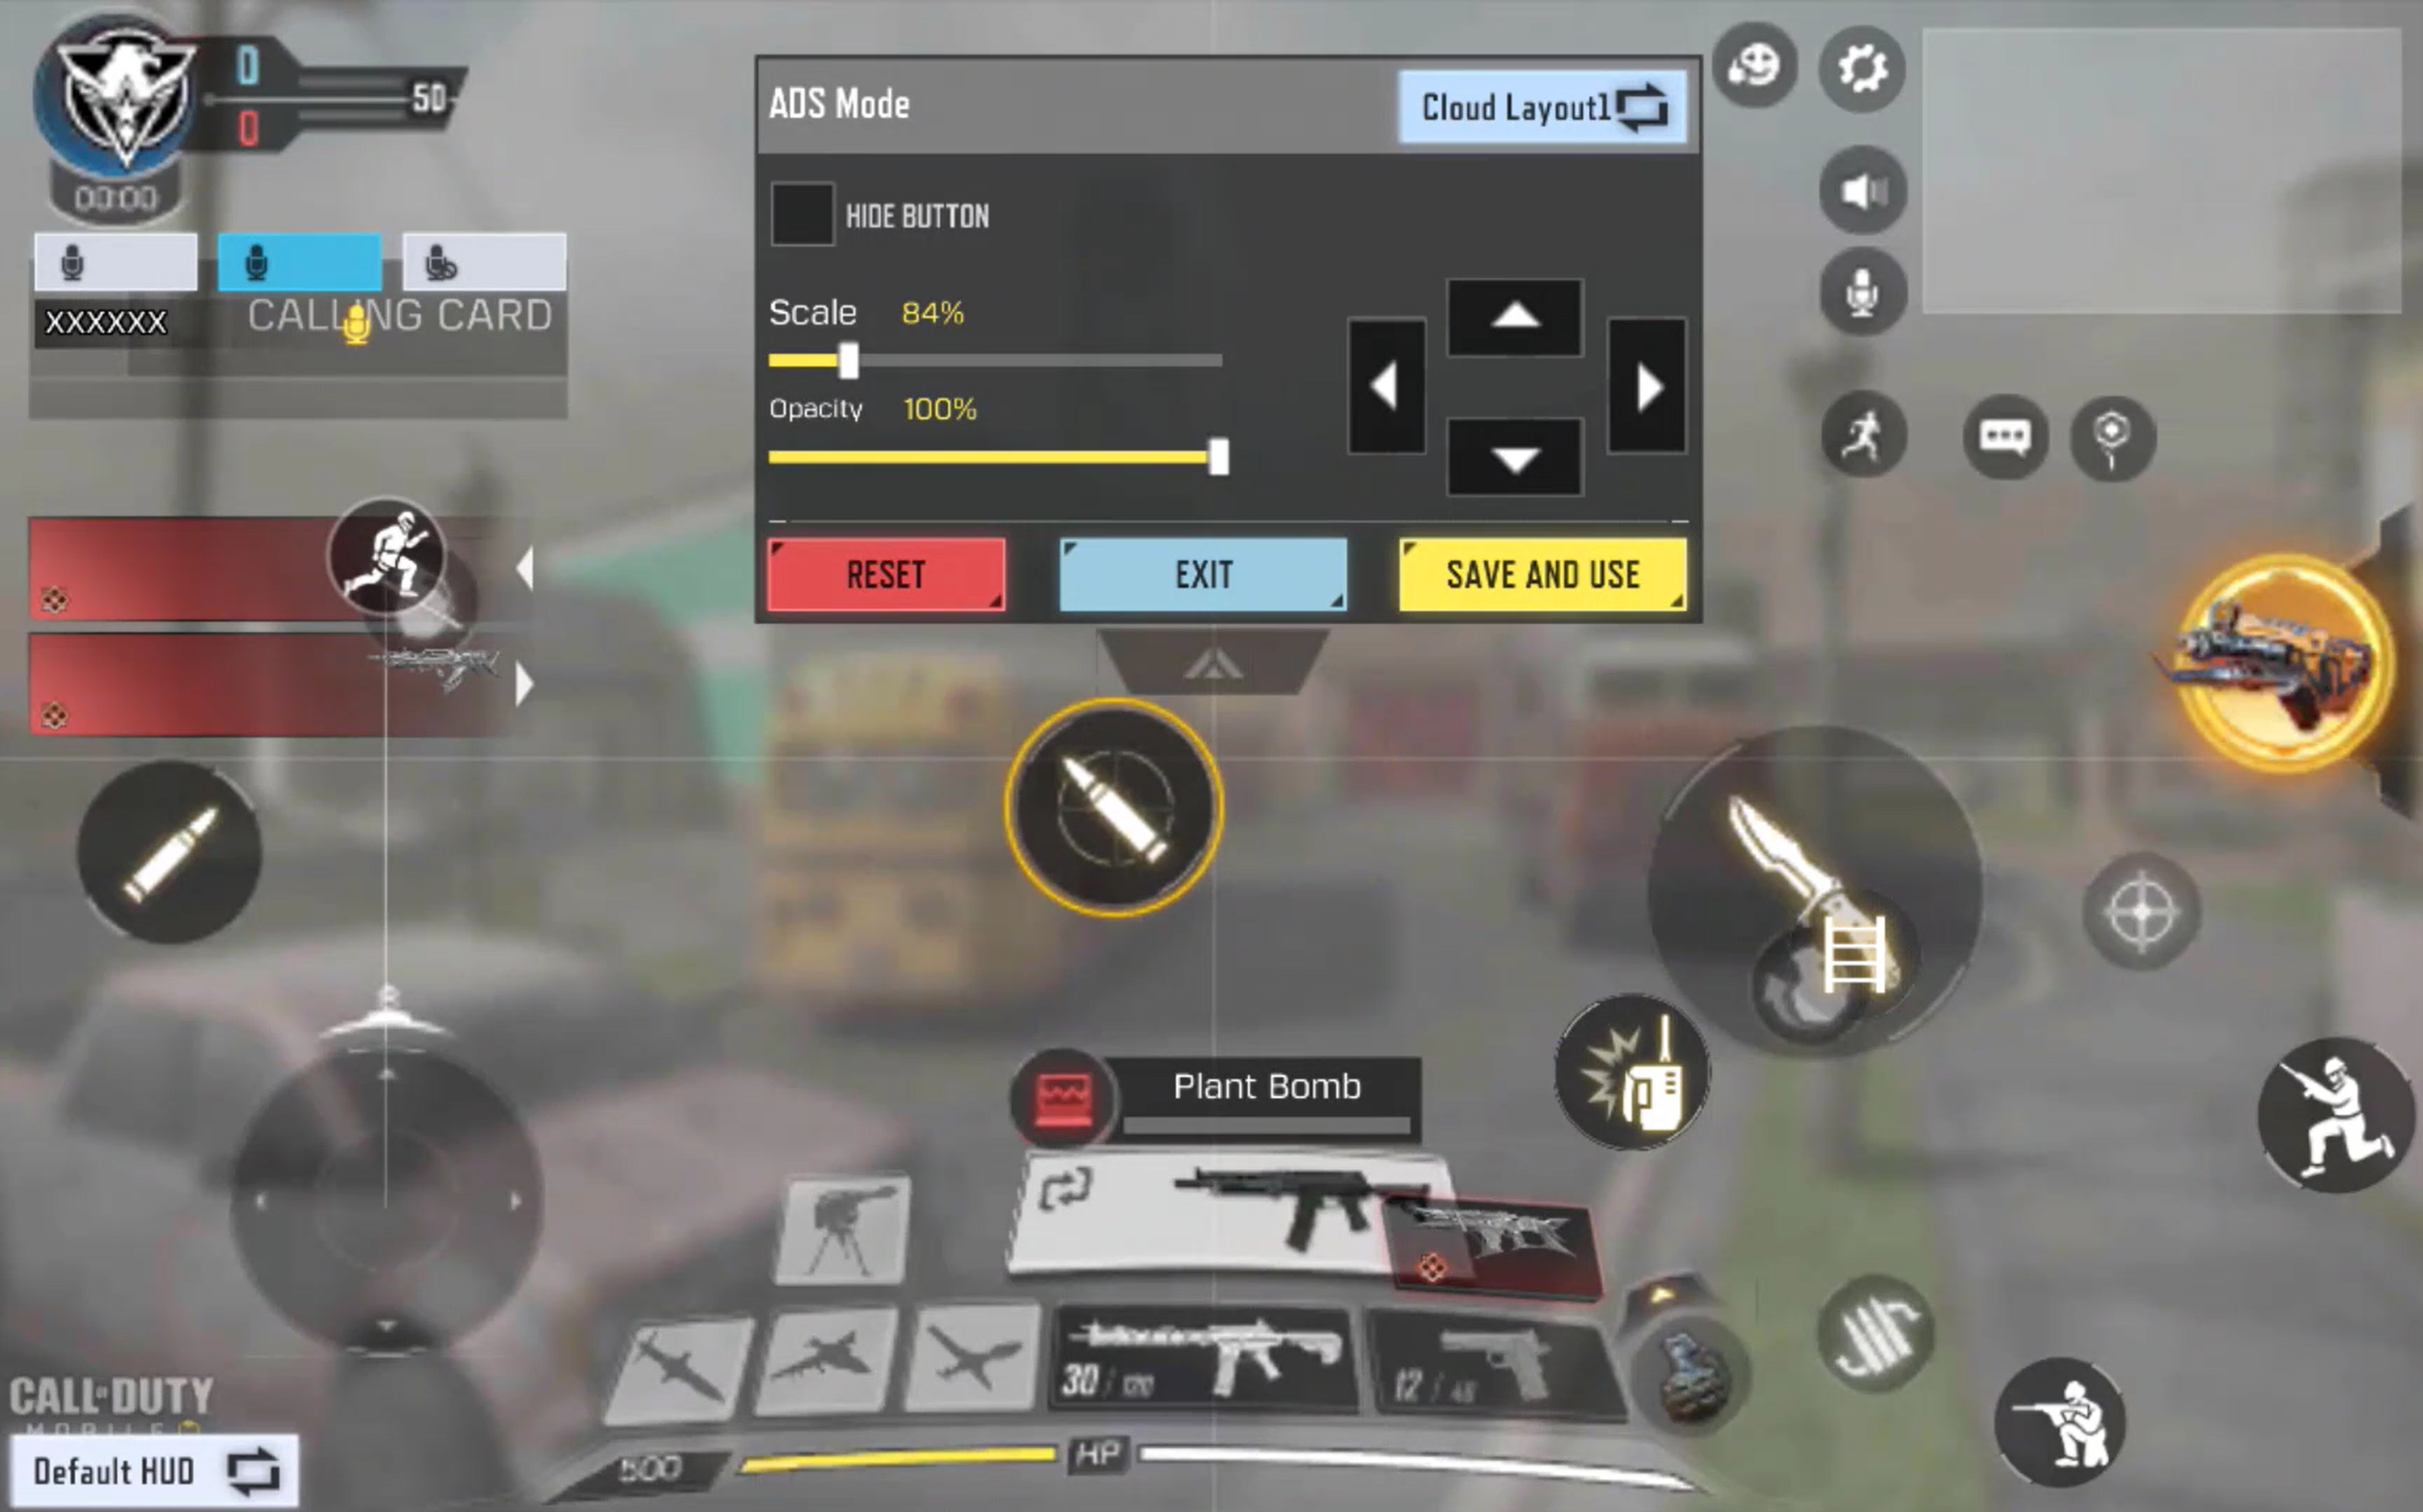 Call of Duty: Mobile screen shot of the controls custom layout settings showing a multitude of touch targets of varying sizes. In the top middle of the screen is a window with a scale and opacity slider as well as options to reset, exit, and save and use the created custom layout.